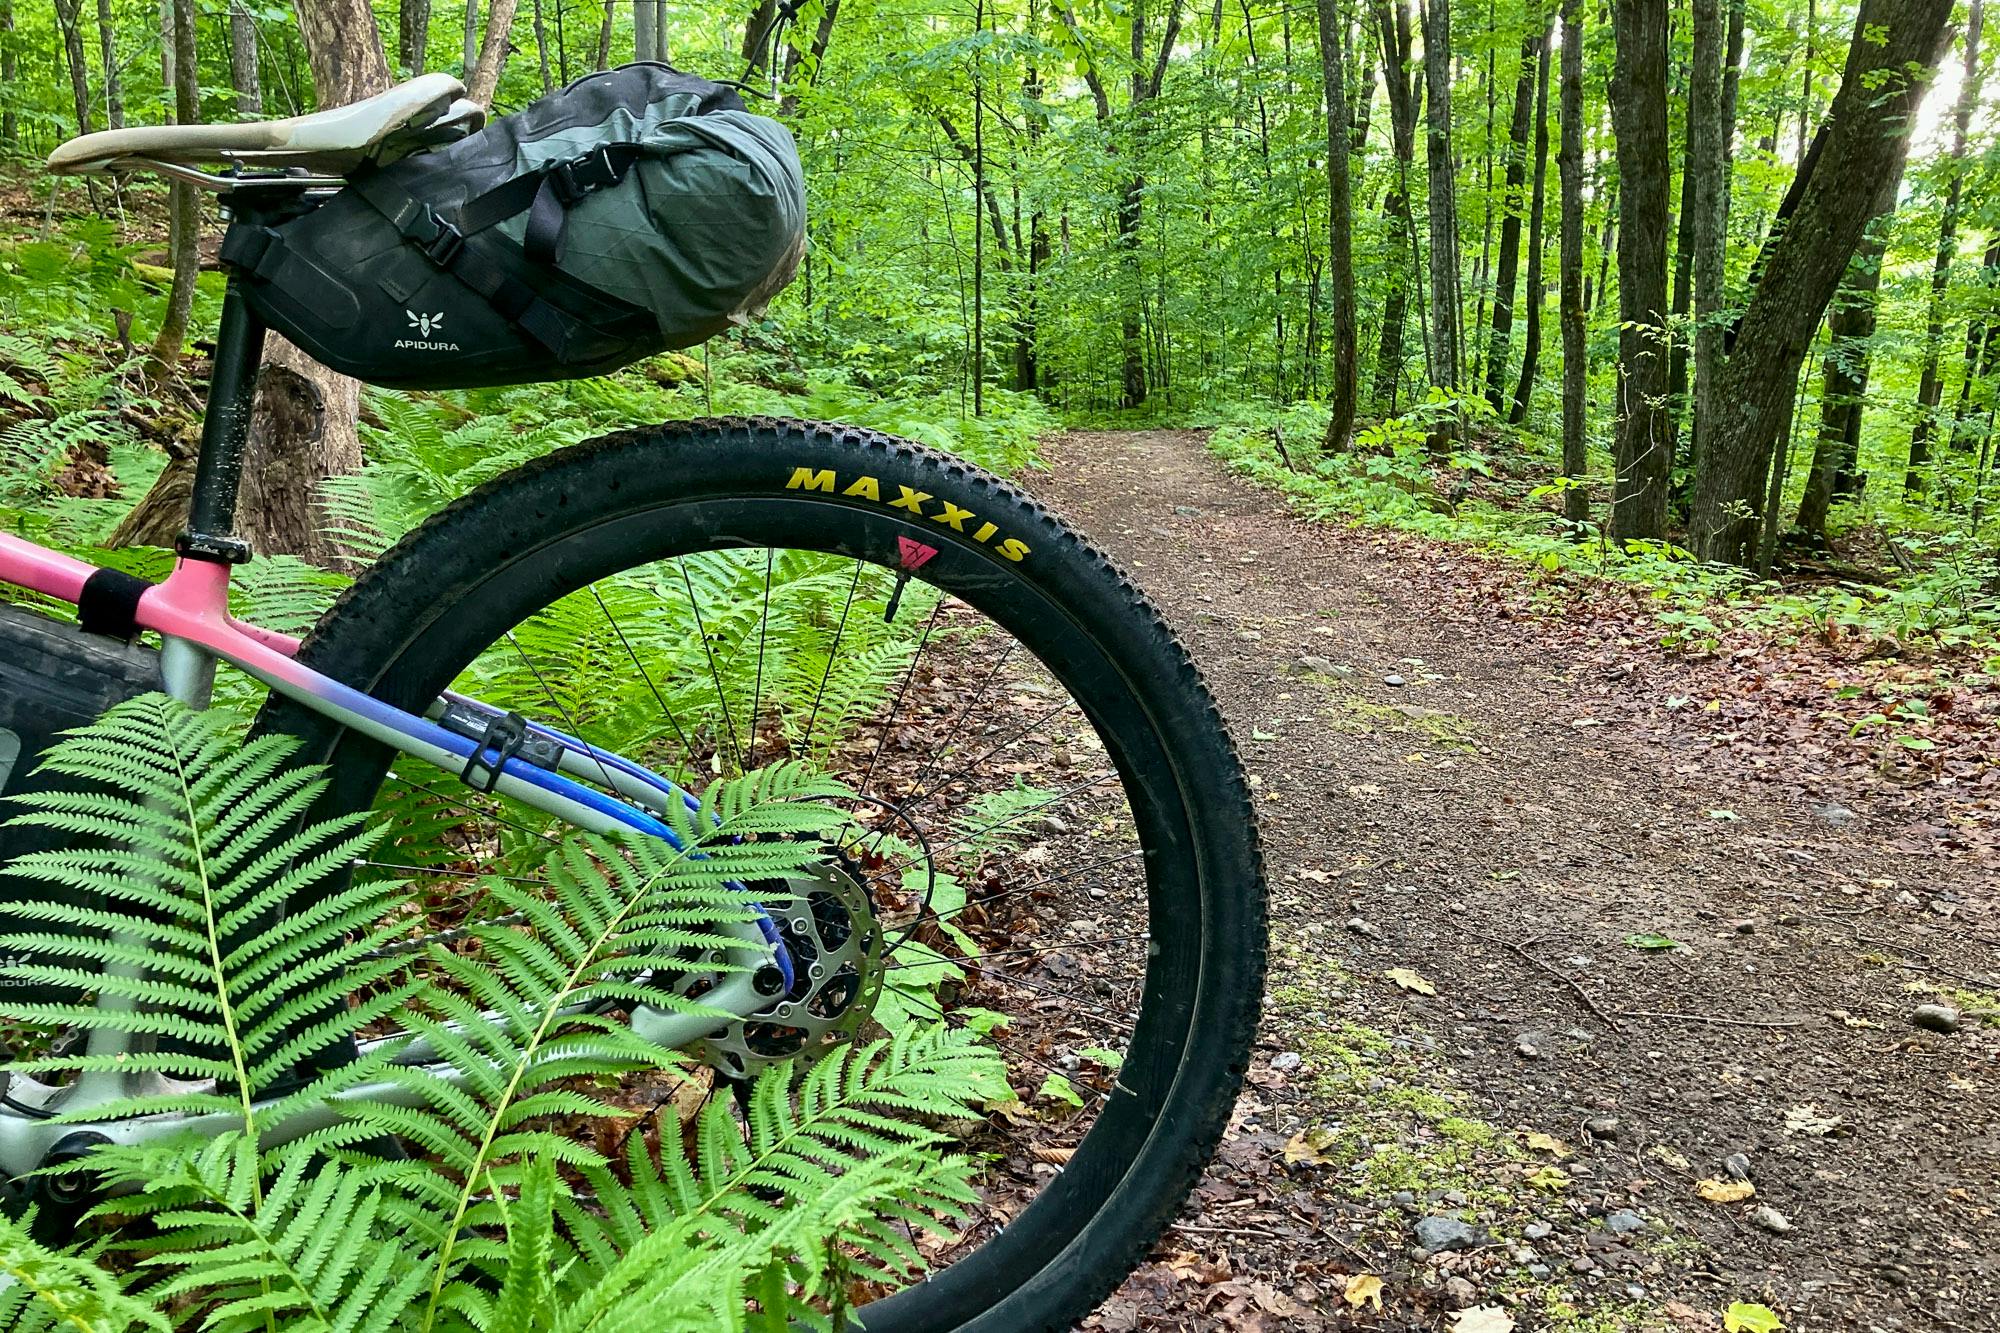 Bikepacking in the doubletrack.